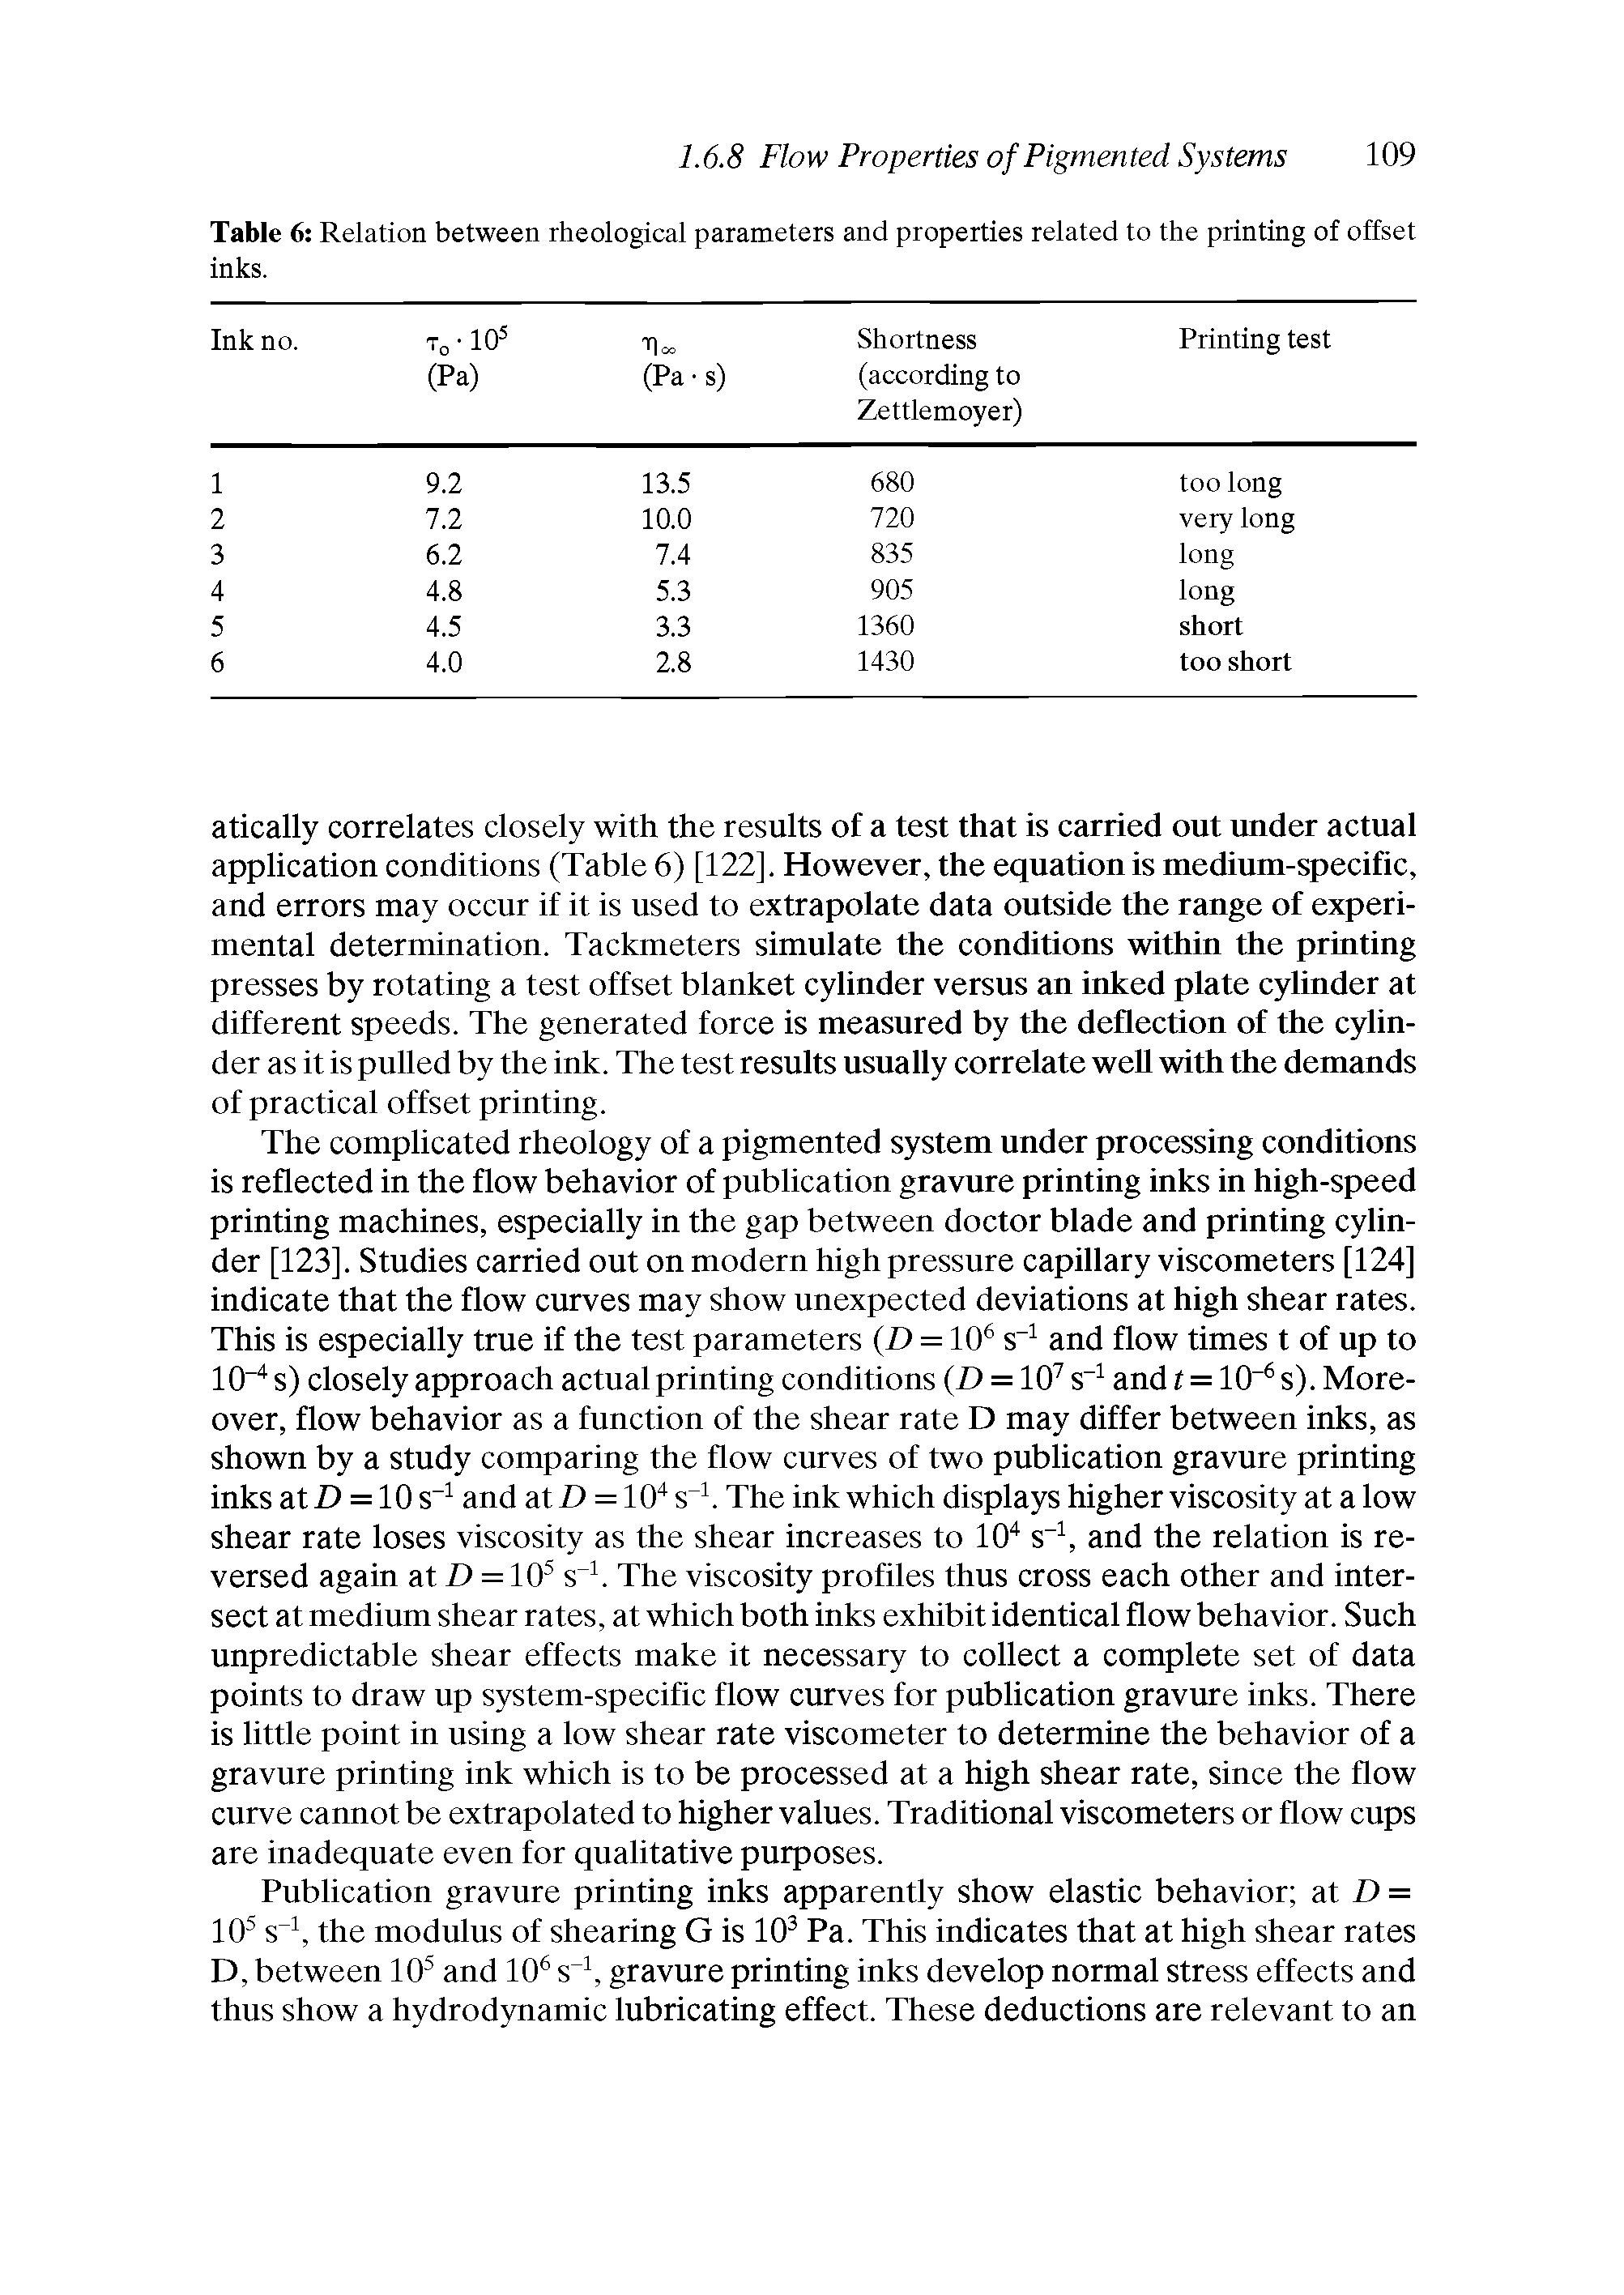 Table 6 Relation between rheological parameters and properties related to the printing of offset inks.